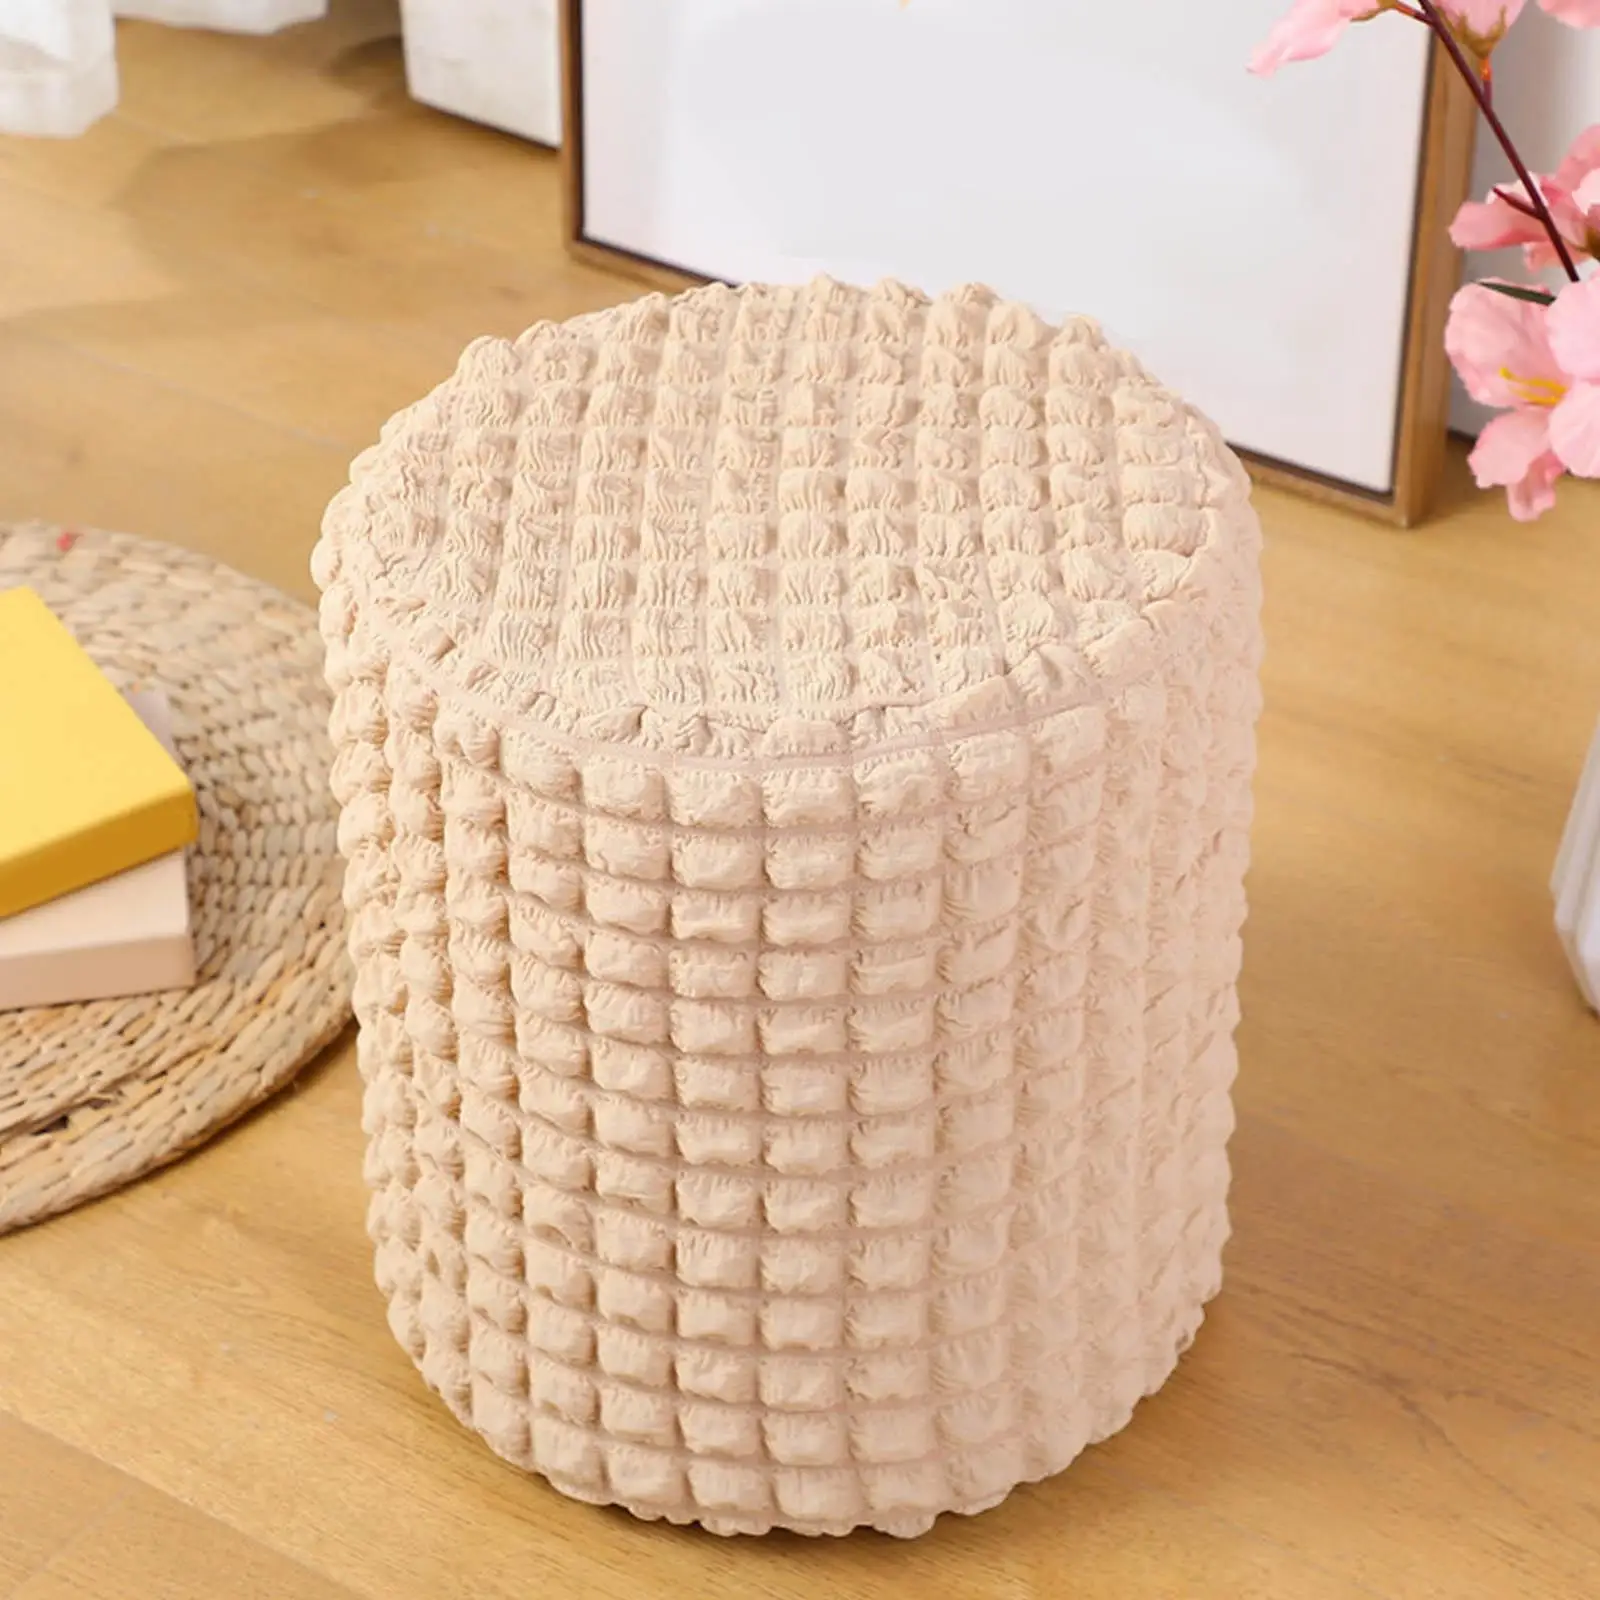 Elastic Ottoman Cover, Ottoman Protector Living Room Furniture Cover Foot Rest Stool Covers for Dining Room Bedroom